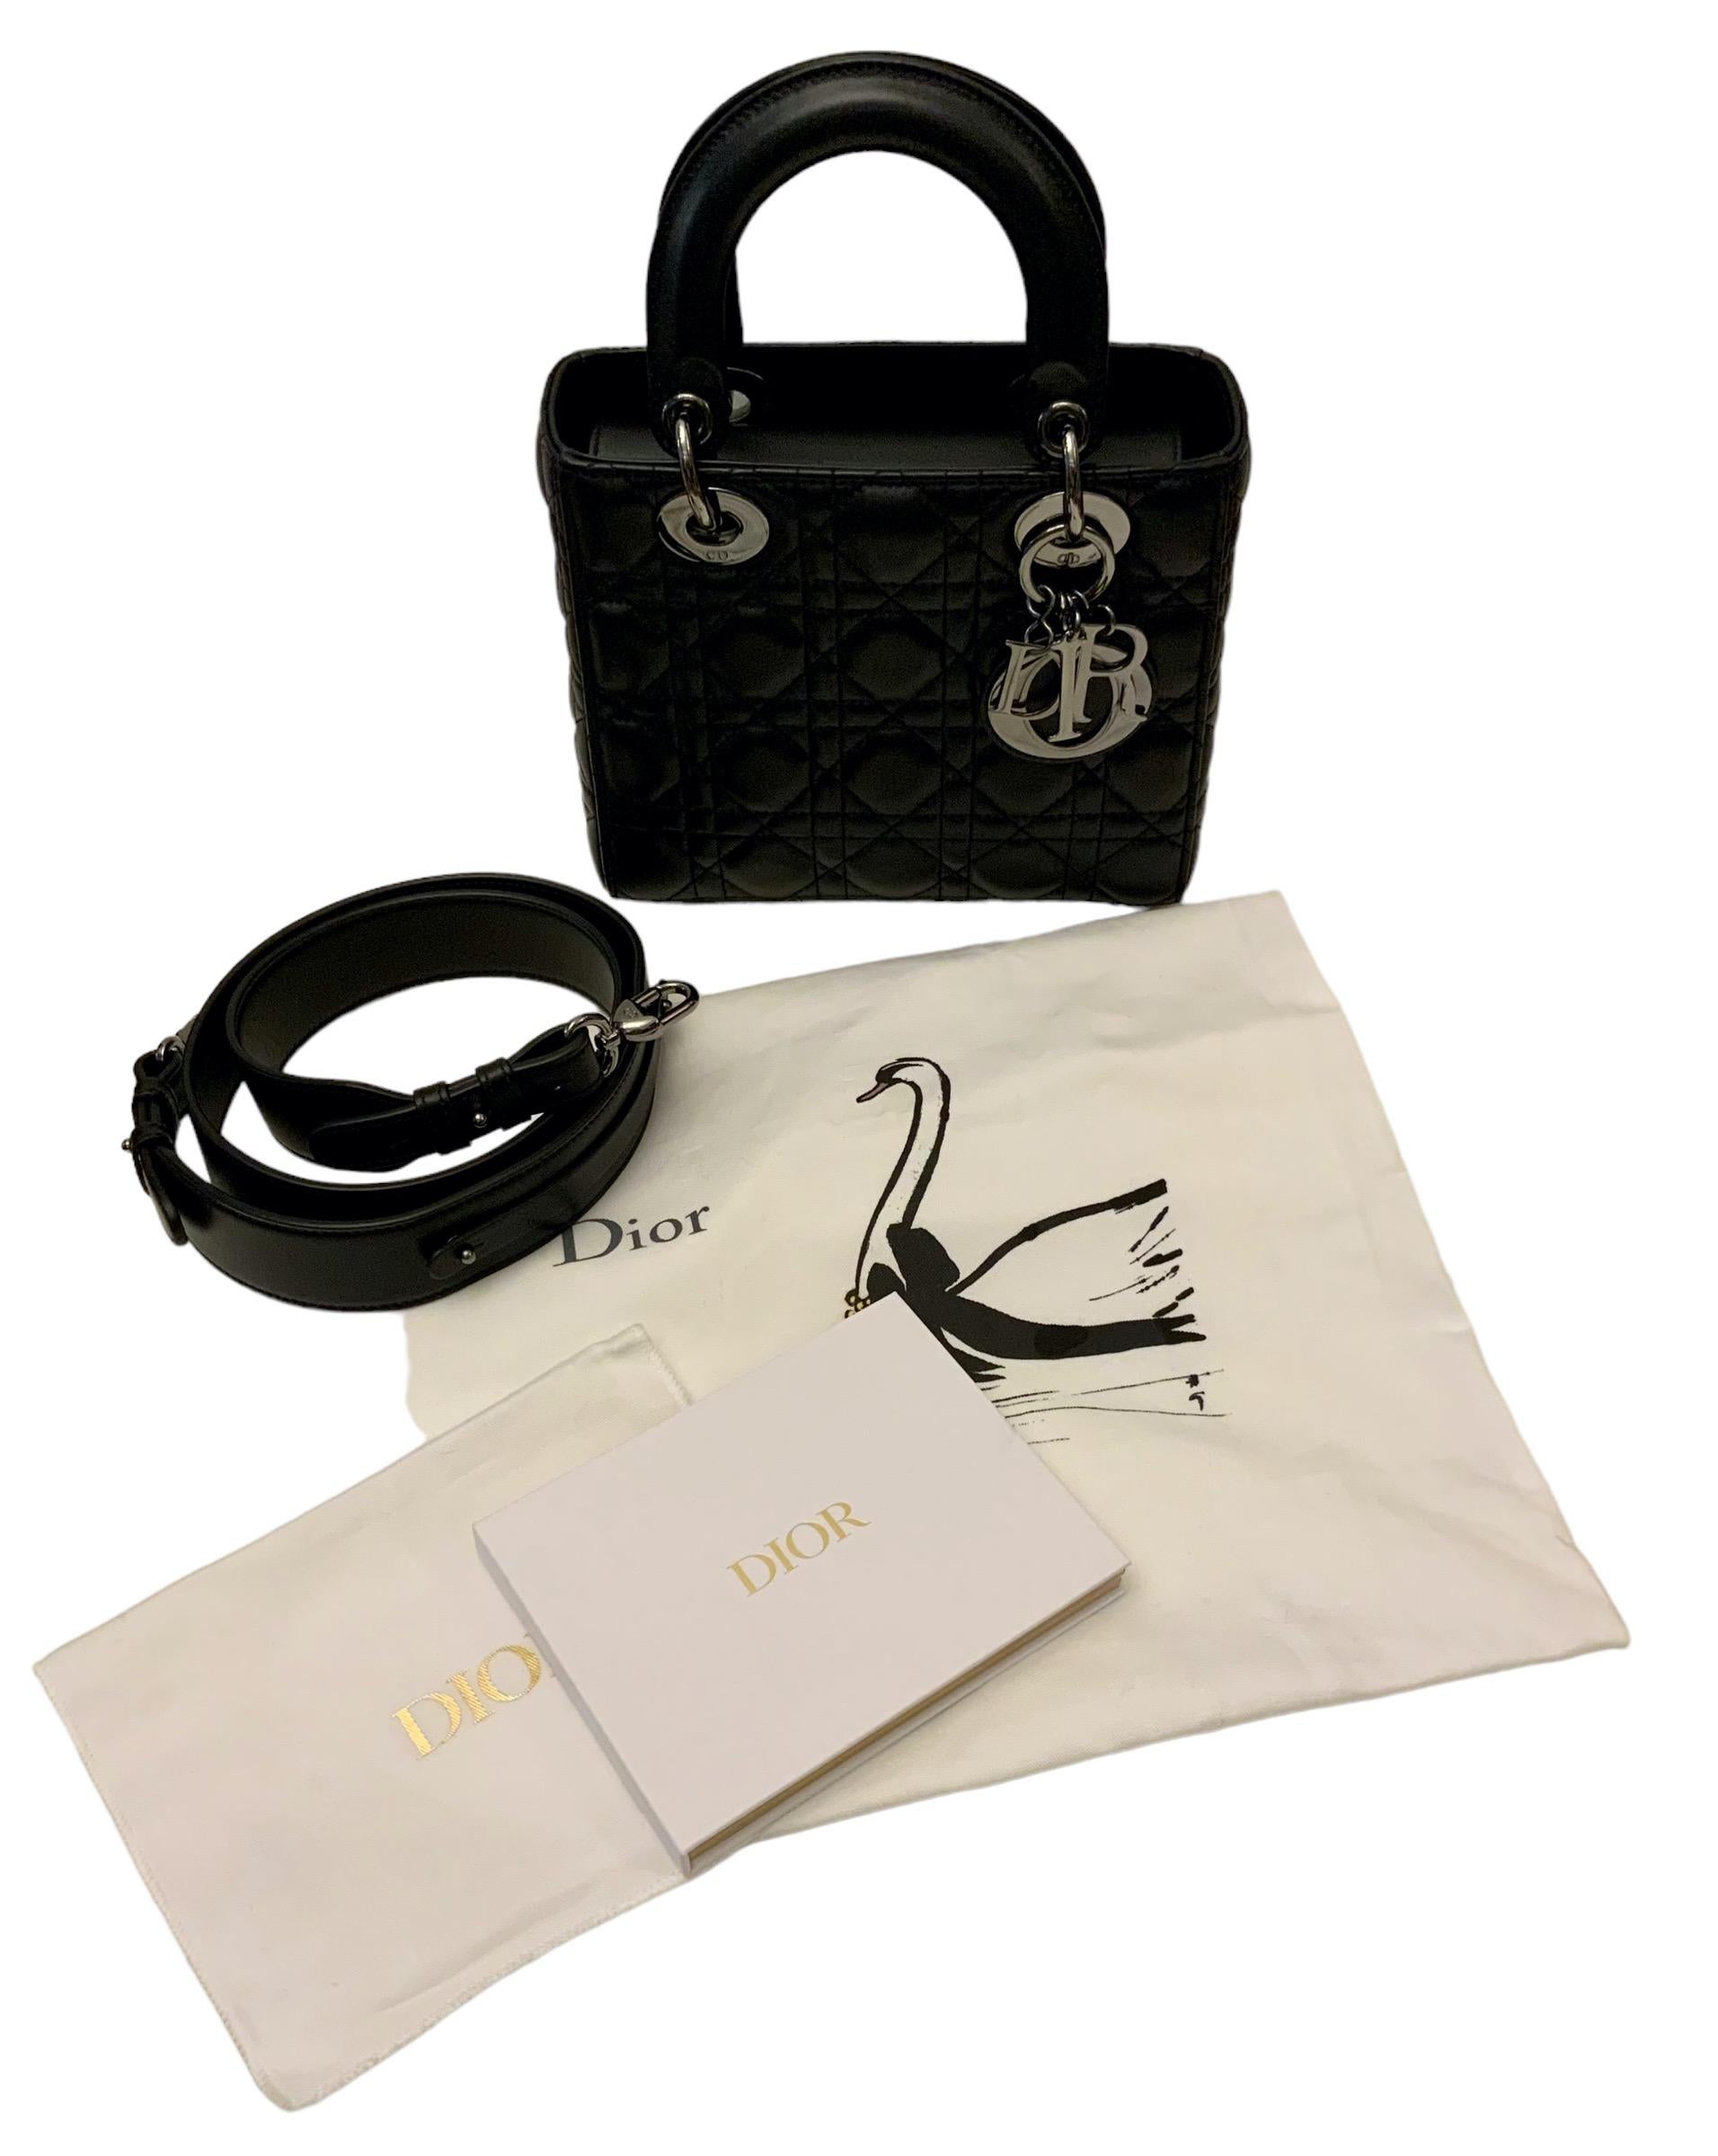 The Lady Dior My ABCDior bag epitomizes Dior's vision of elegance and beauty. 
This pre-owned but in perfect condition is crafted in black lambskin with cannage stitching, creating the instantly recognizable quilted texture. 
Ruthenium finish  